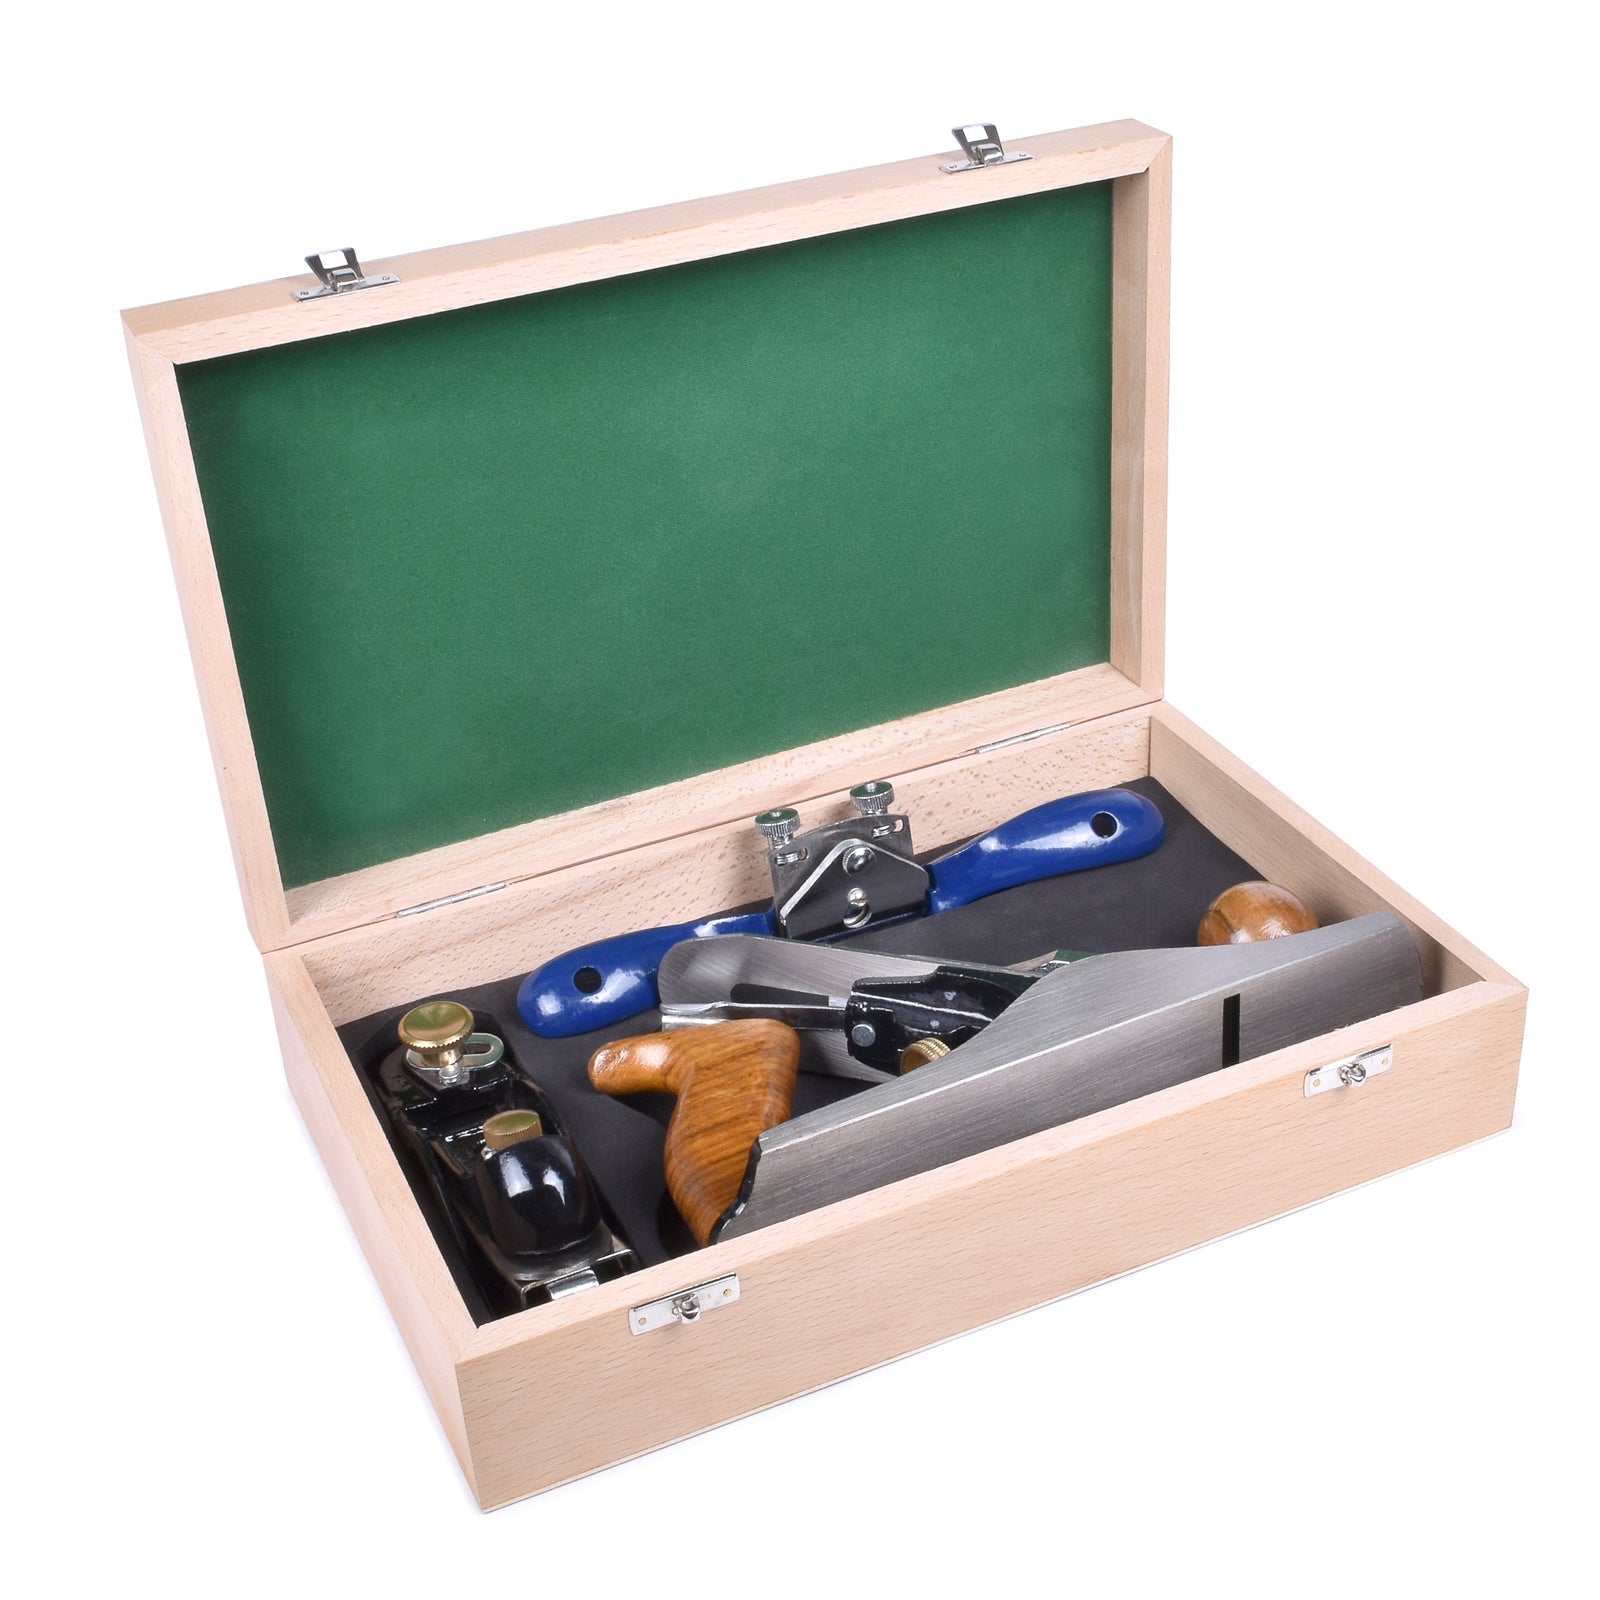 3 - piece Woodworking Plane Set - Micro - Mark Planers